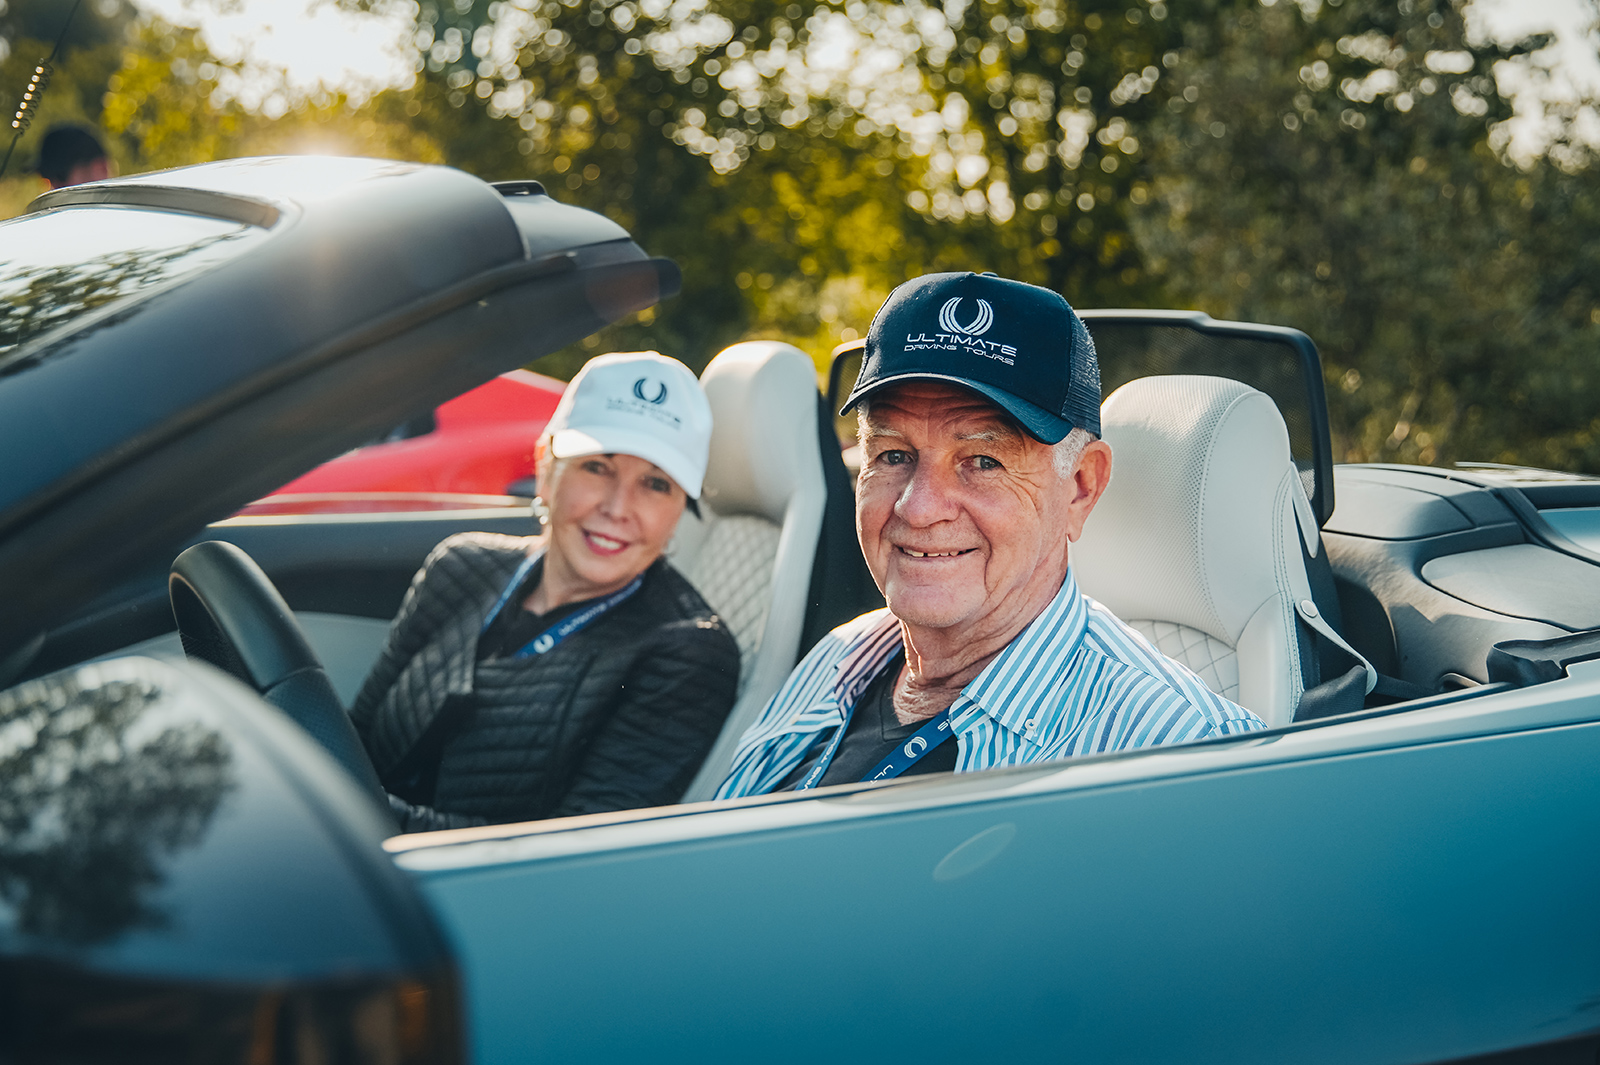 A happy couple wearing Ultimate Driving Tours branded baseball caps as they drive their convertible supercar